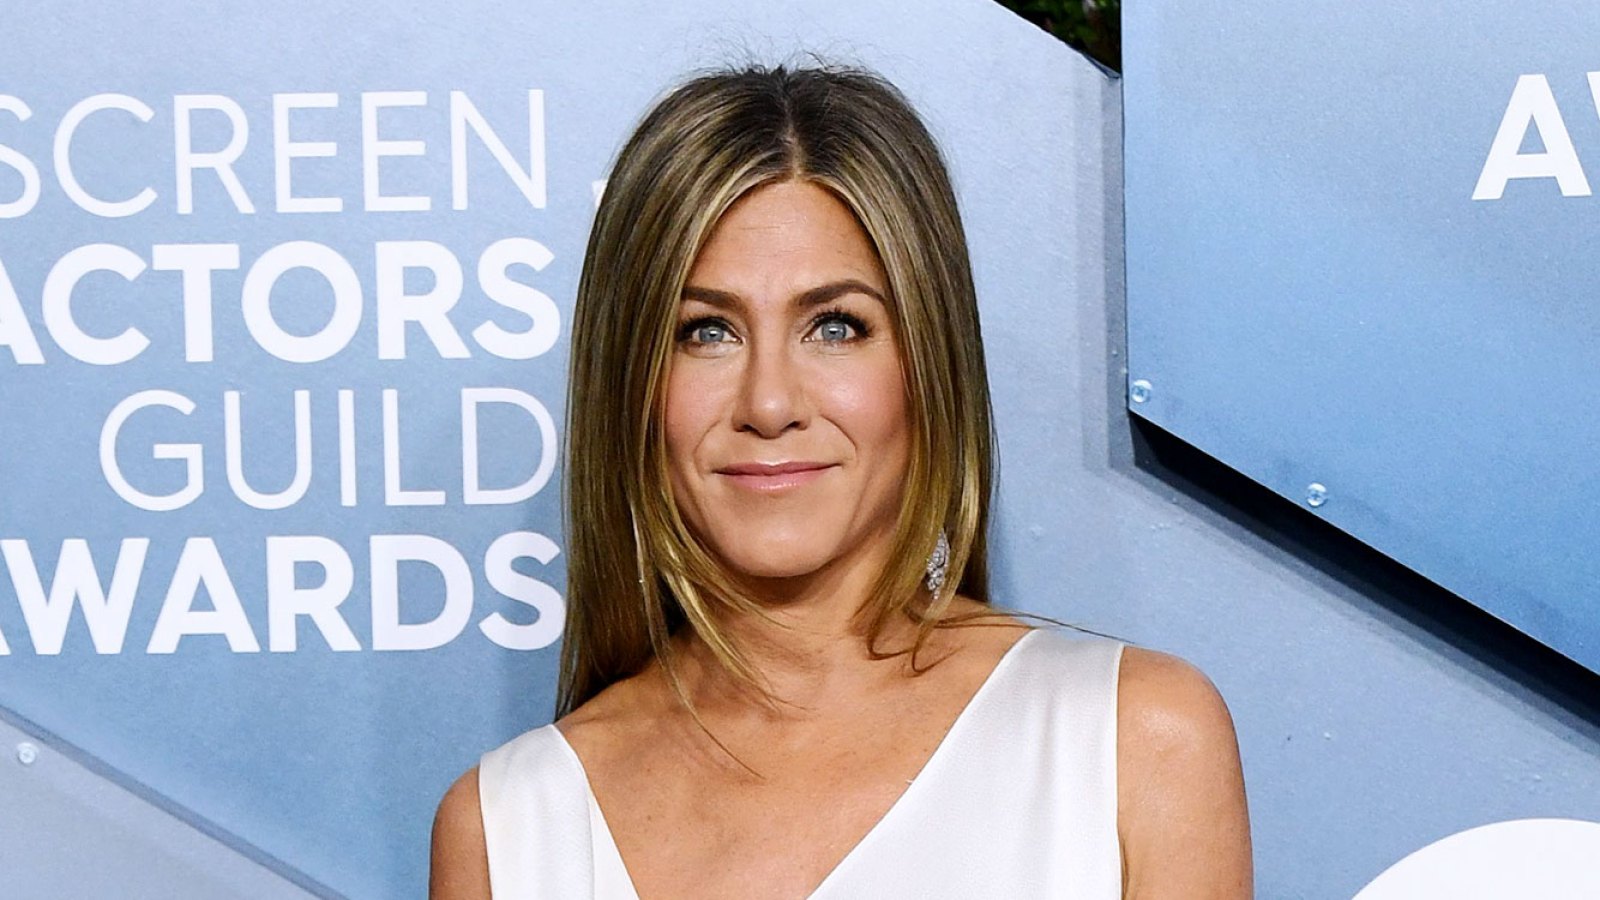 Friends Jennifer Aniston Shemale - Jennifer Aniston Reacts to Claims That 'Friends' is 'Offensive'